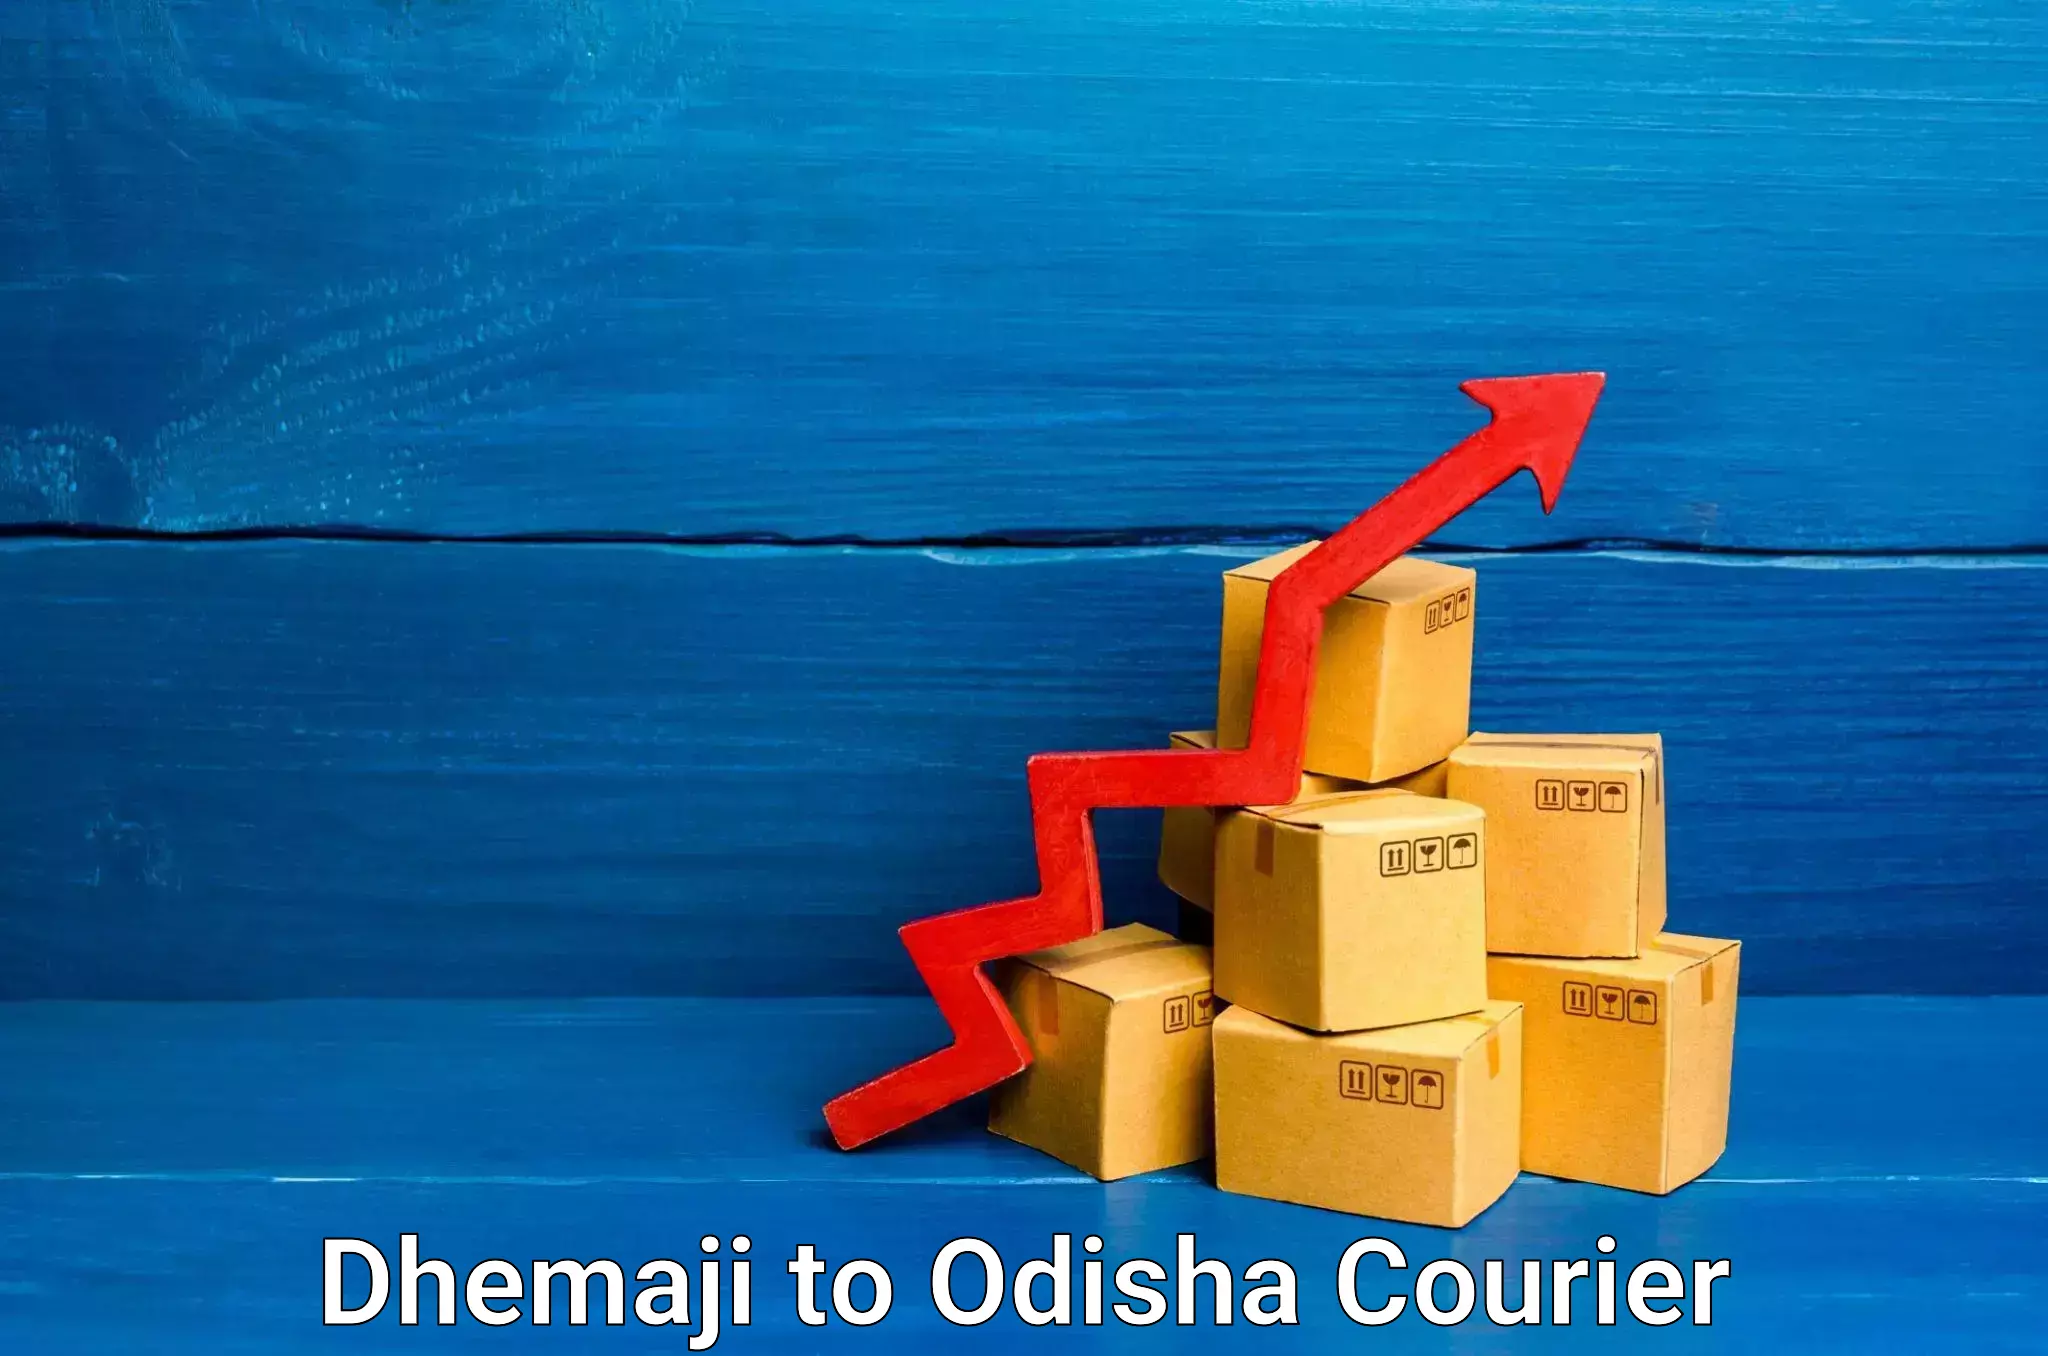 International courier networks Dhemaji to Bonth